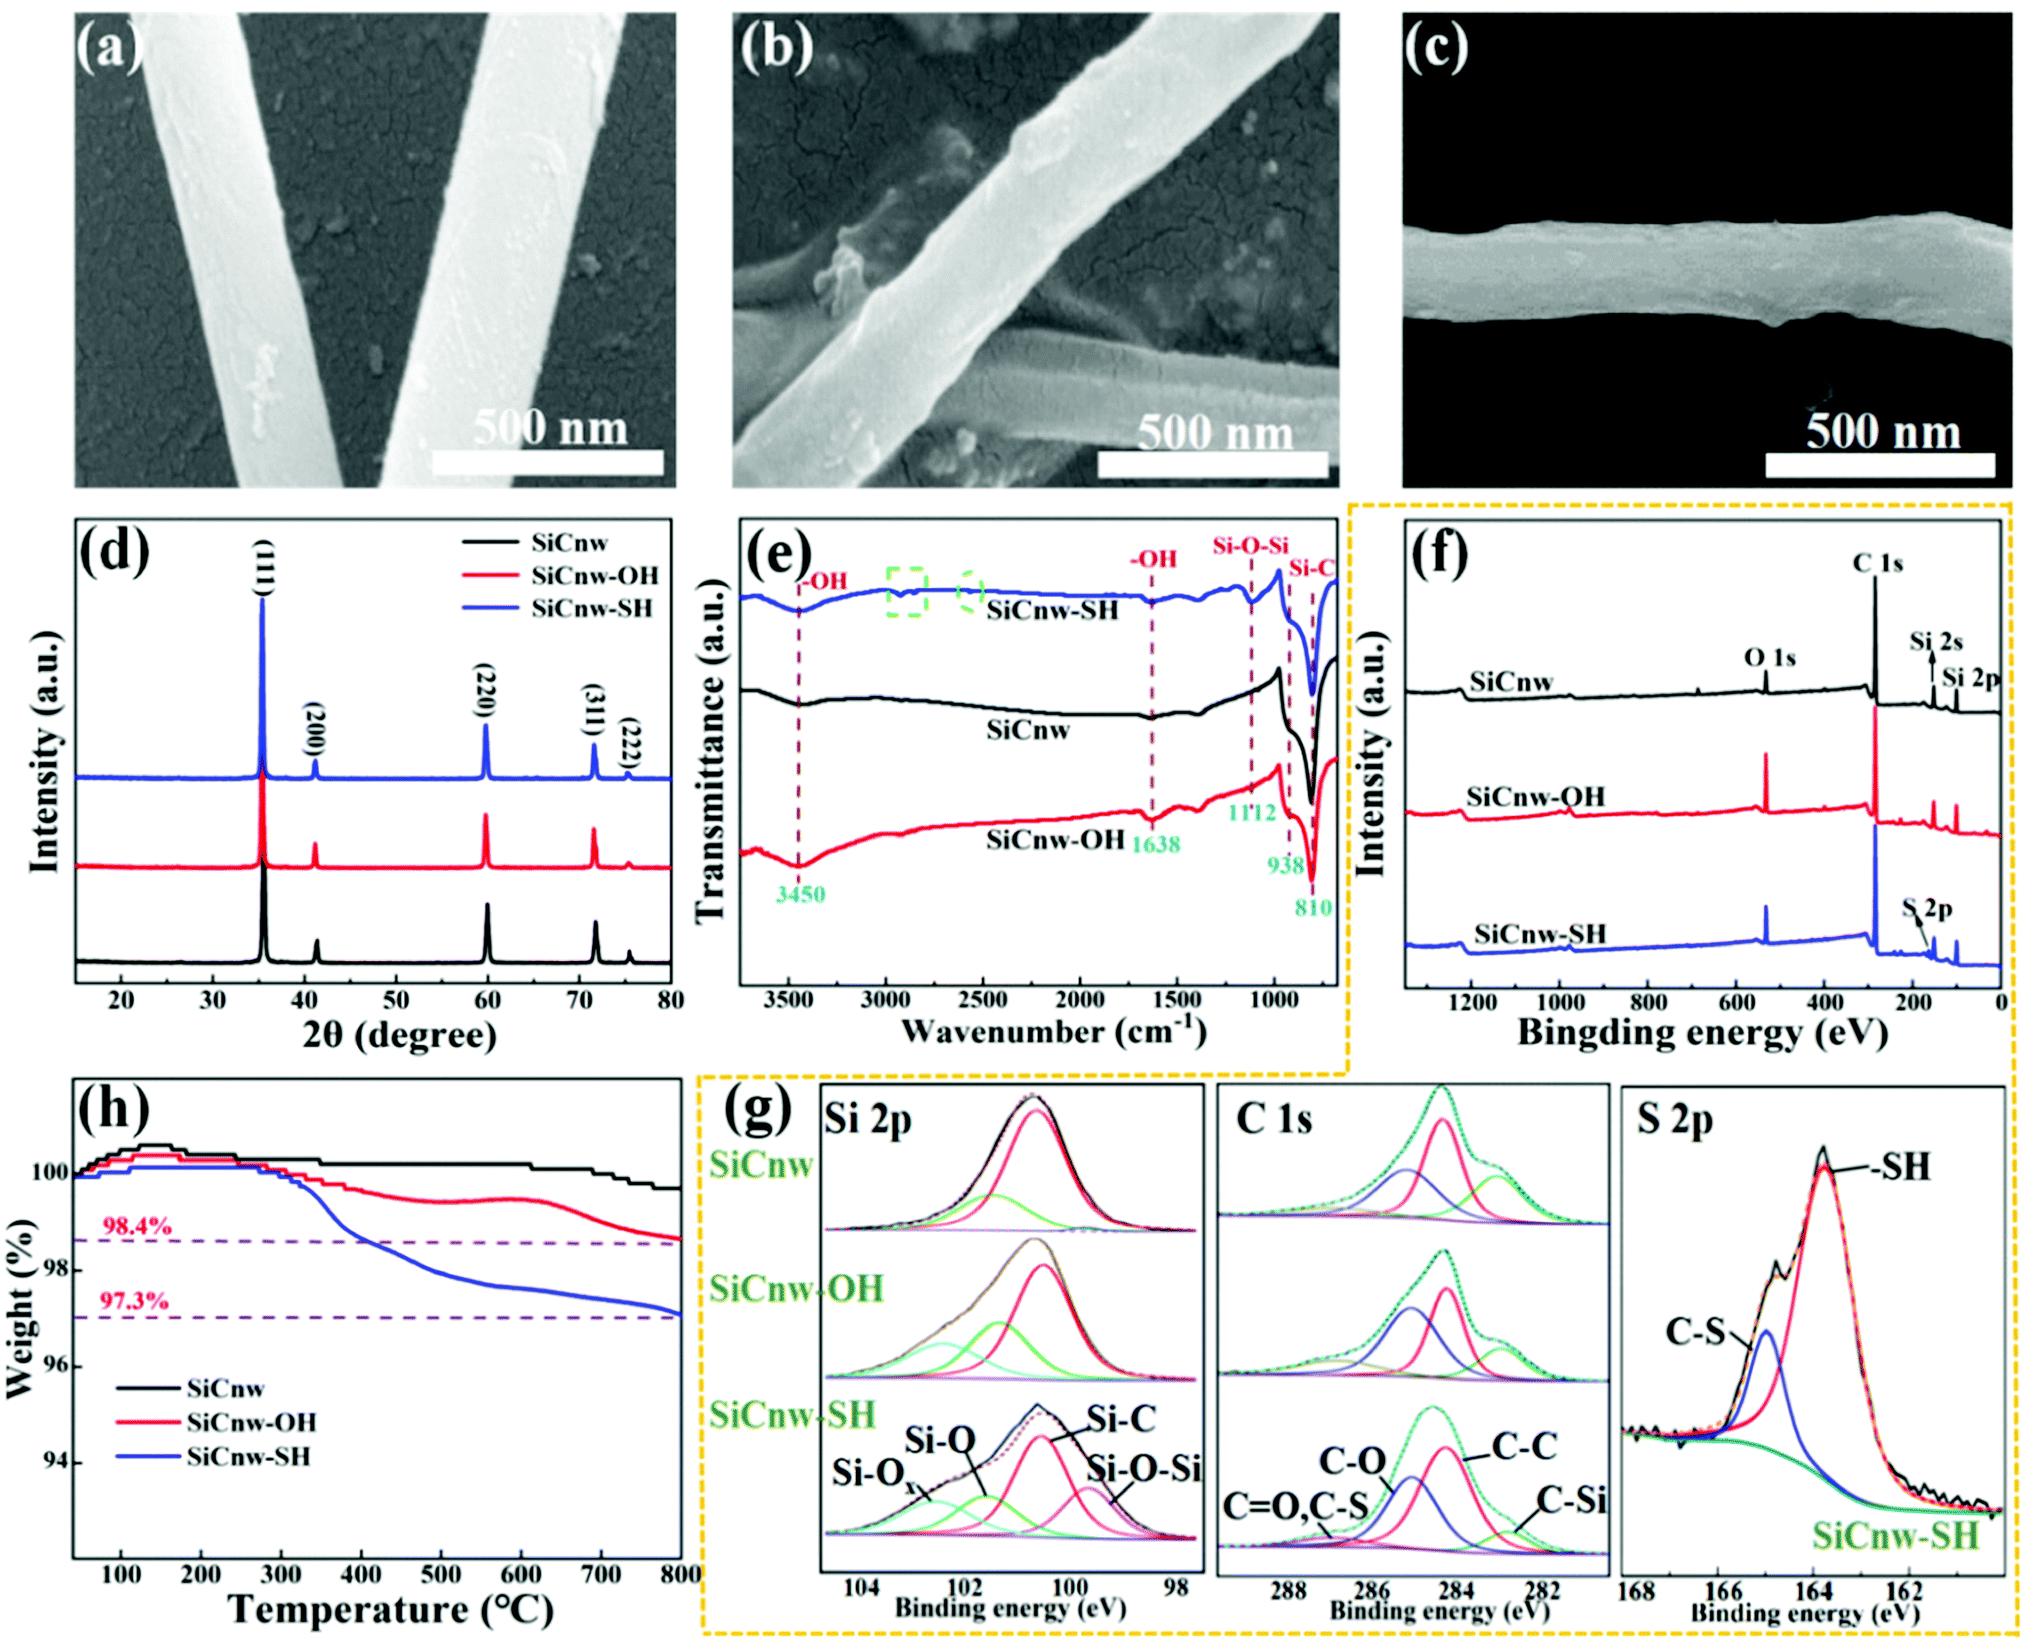 Achieving Significant Thermal Conductivity Improvement Via Constructing Vertically Arranged And Covalently Bonded Silicon Carbide Nanowires Natural Ru Journal Of Materials Chemistry C Rsc Publishing Doi 10 1039 D1tcb